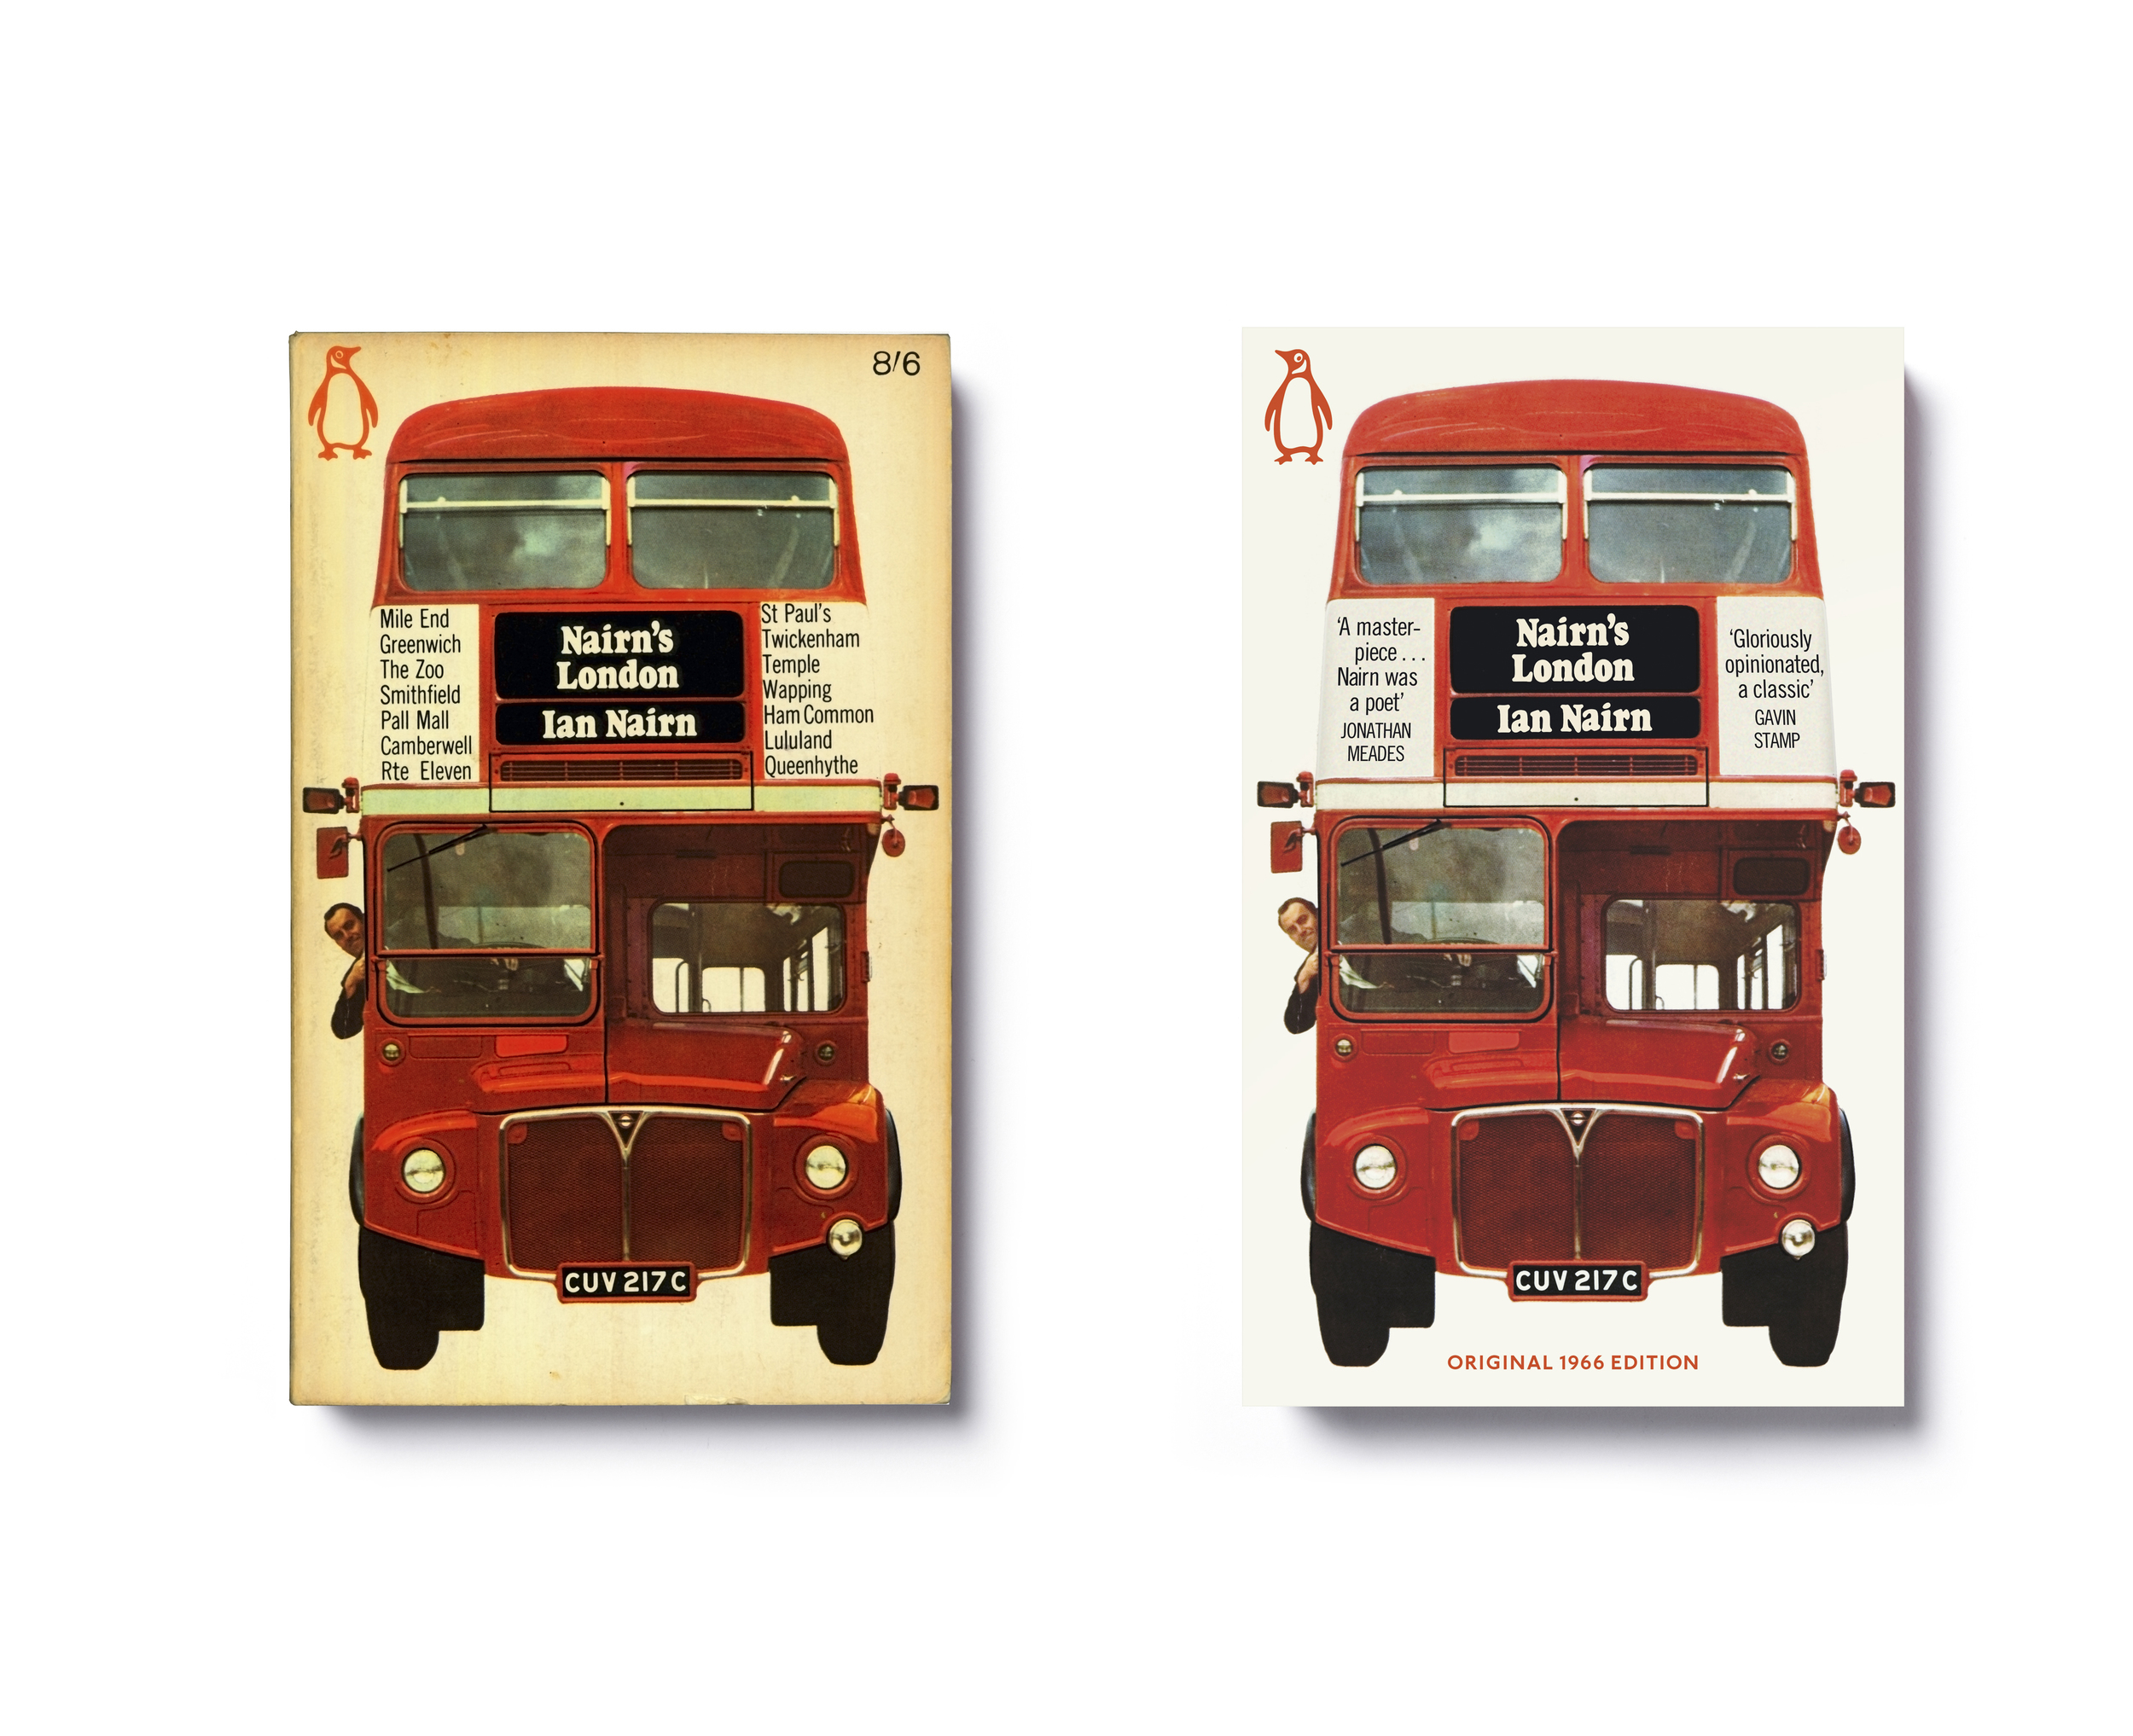  Nairn's London by Ian Nairn -  Left : 1966 paperback design: Michael Norris photography: credit to come  Right : 2014 paperback edition update: Jim Stoddart  